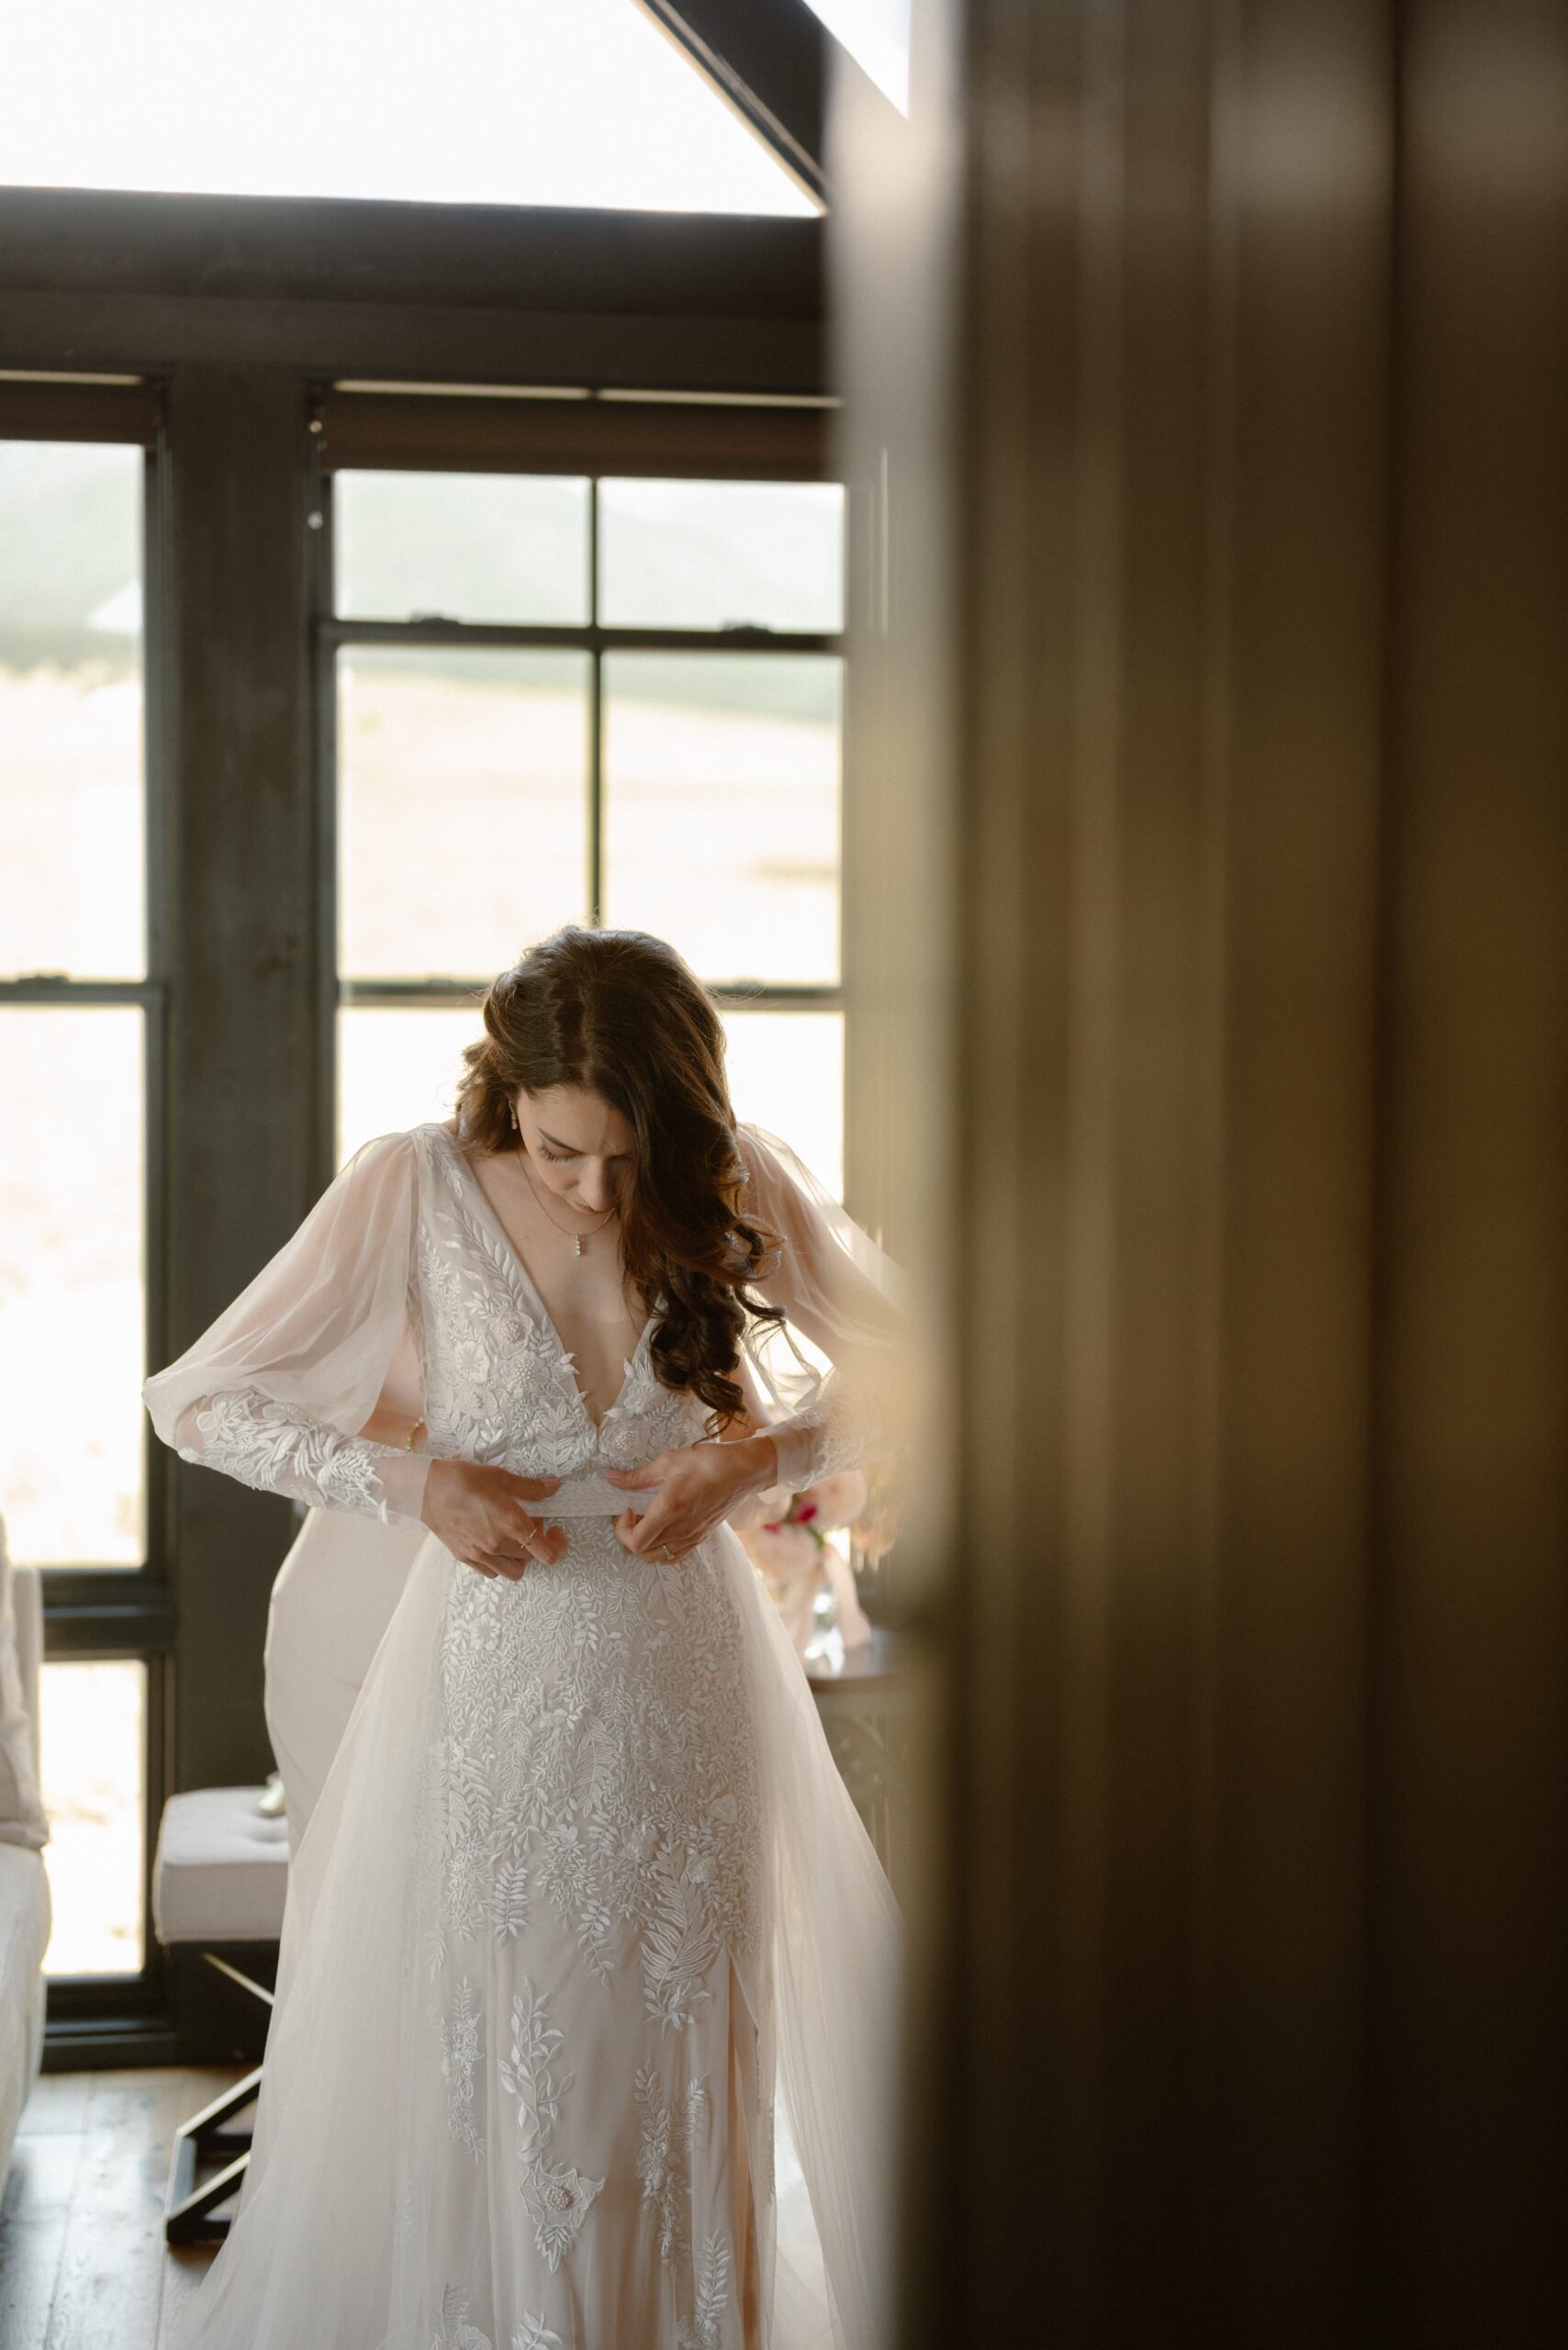 A photo of a bride getting her wedding dress put on at Three Peaks Ranch. Photo by Ashley Joyce.